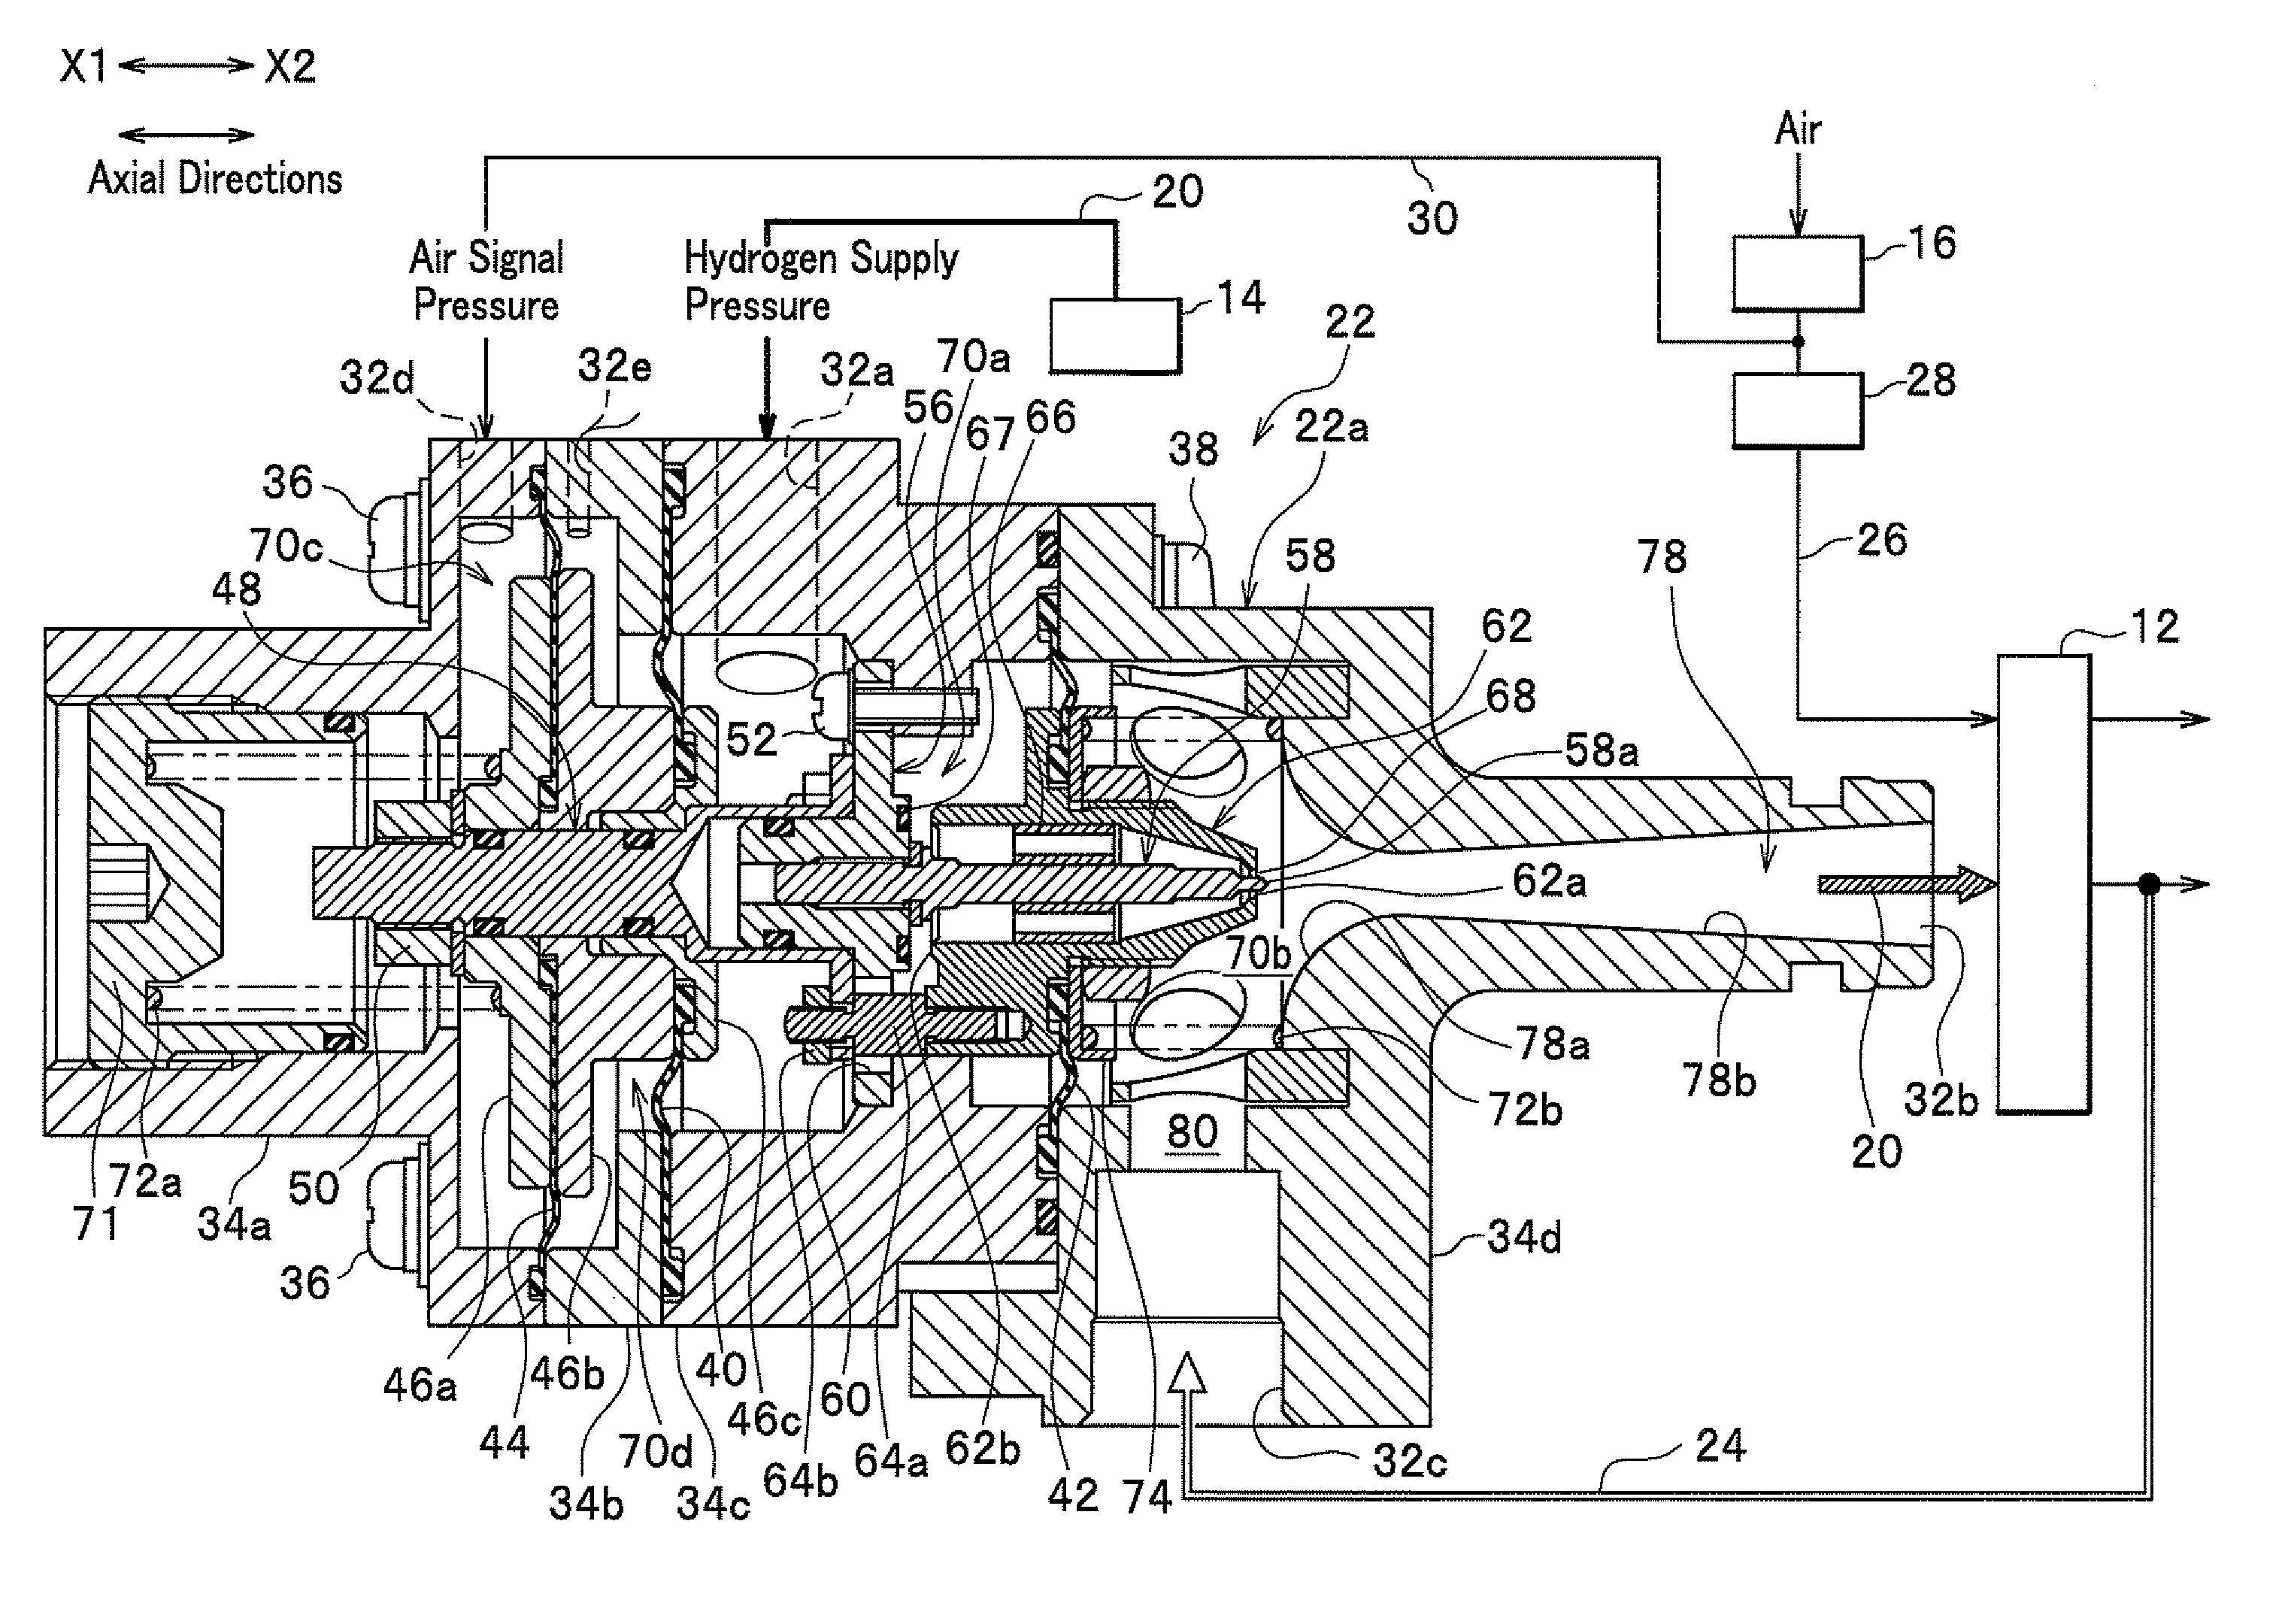 Ejector apparatus for fuel cell